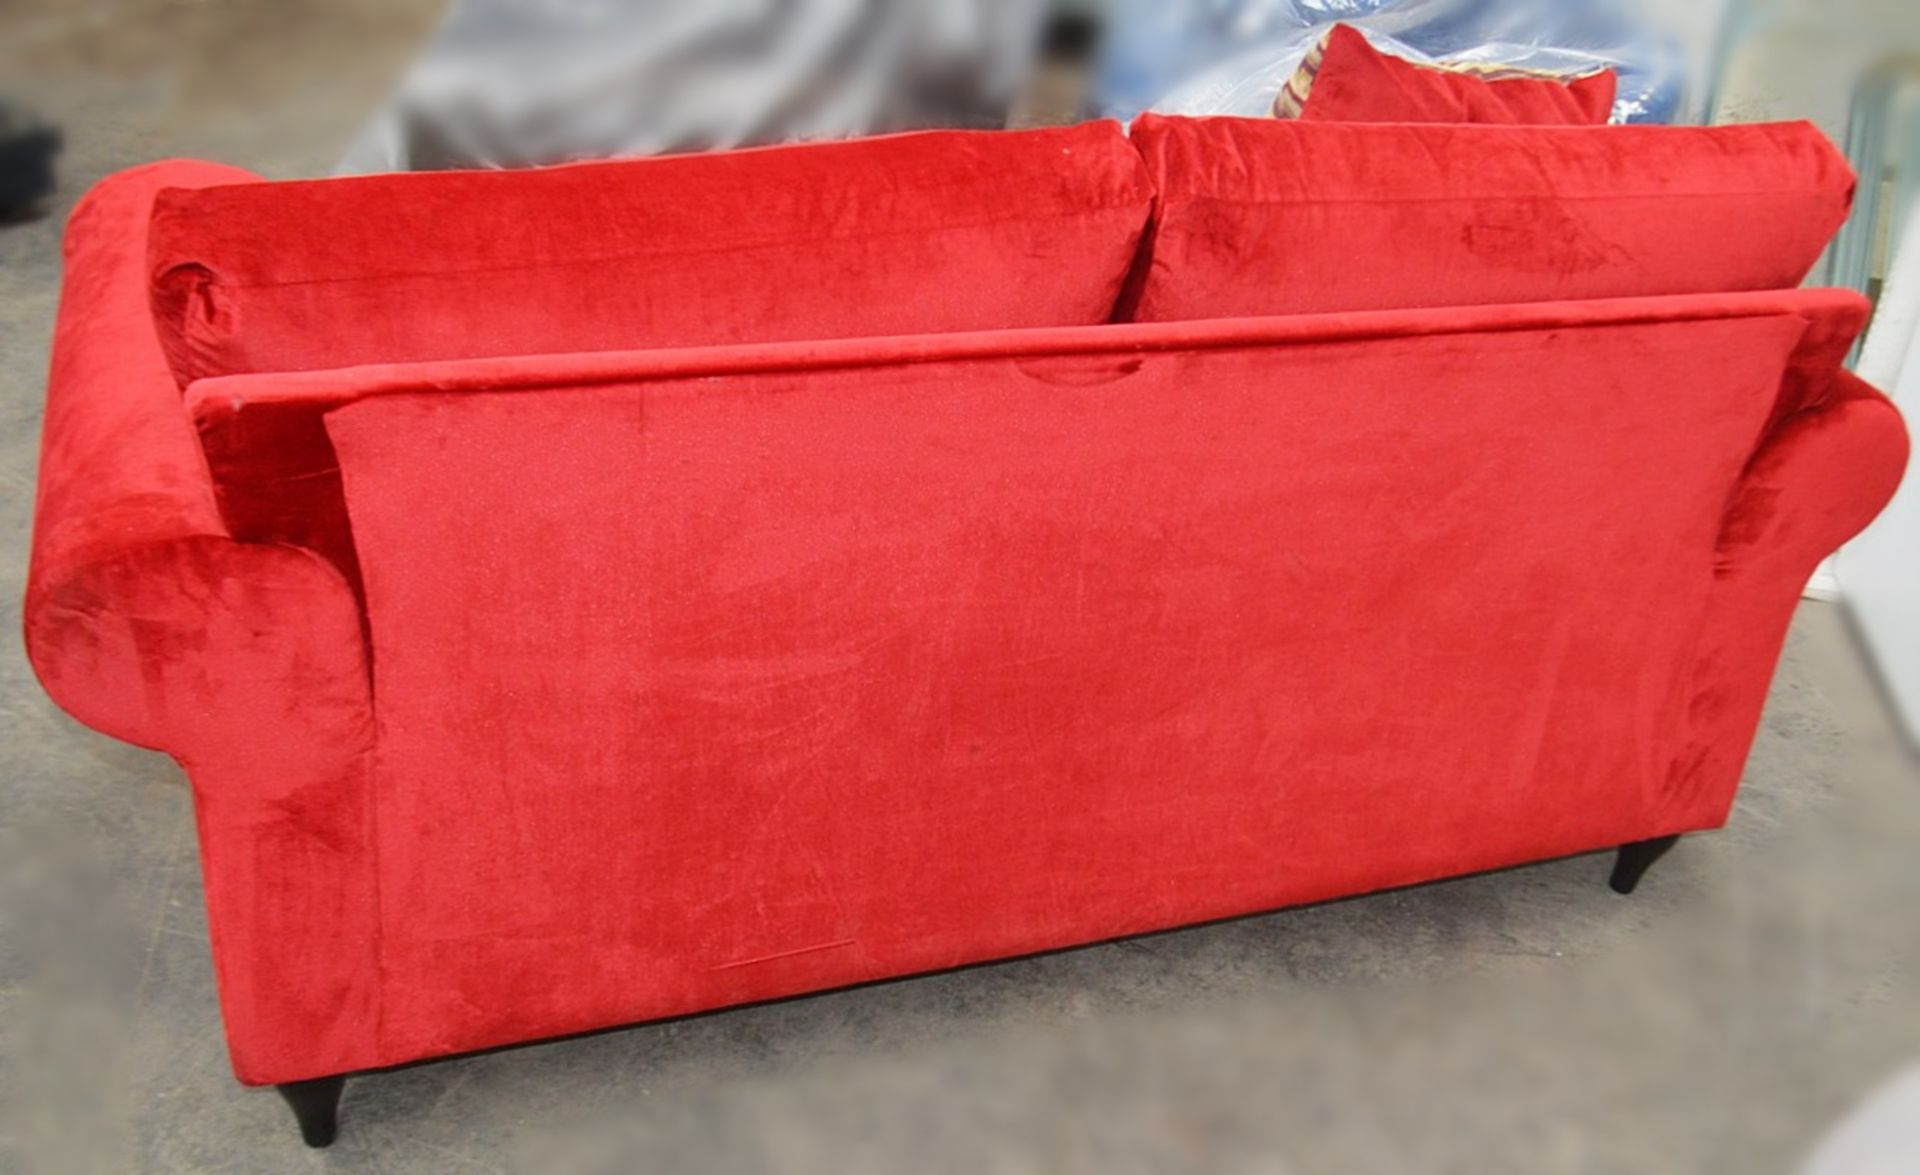 1 x Bespoke 2-Seater Commercial Sofa In A Bright Red Velvet With Complimenting Cushion - - Image 5 of 6